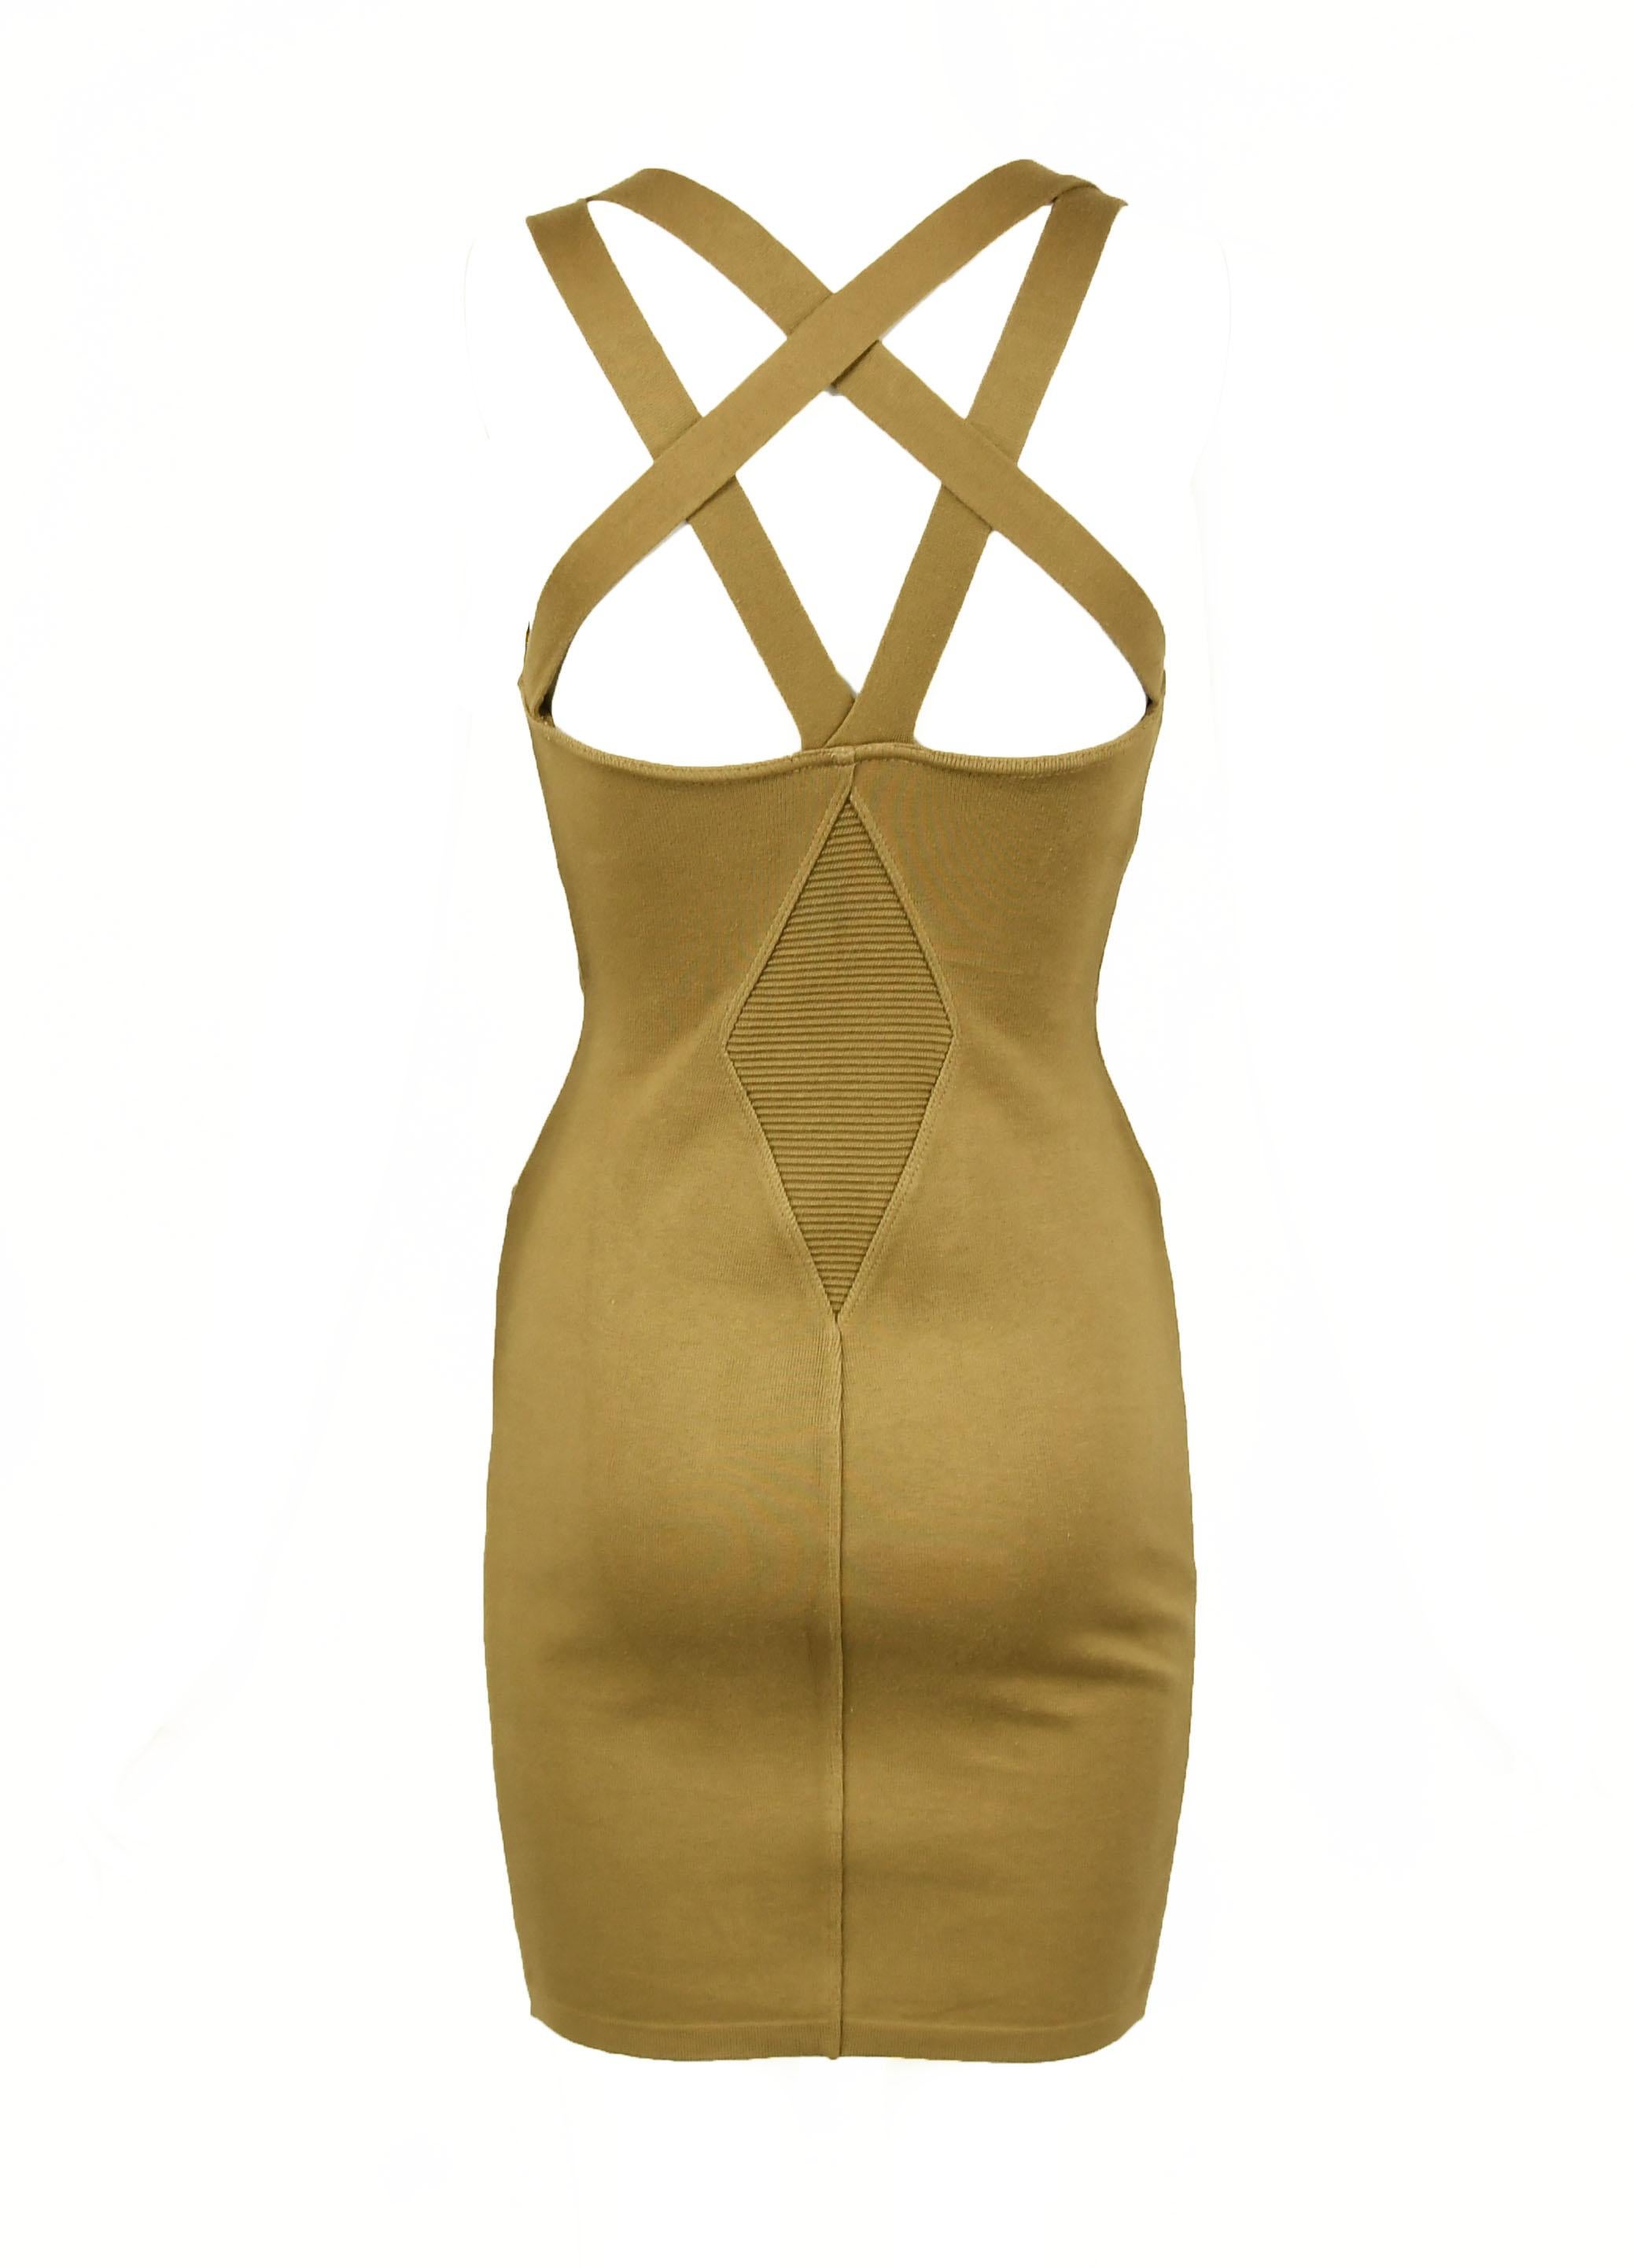 Sexy vintage Alaia dress made out of a khaki colored knit with ribbed knit inserts and a strappy back.  Perfect outfit for a date or a night out on the town.  Coveted vintage collection by Azzedine Alaia.

Size: M

Condition: Excellent vintage